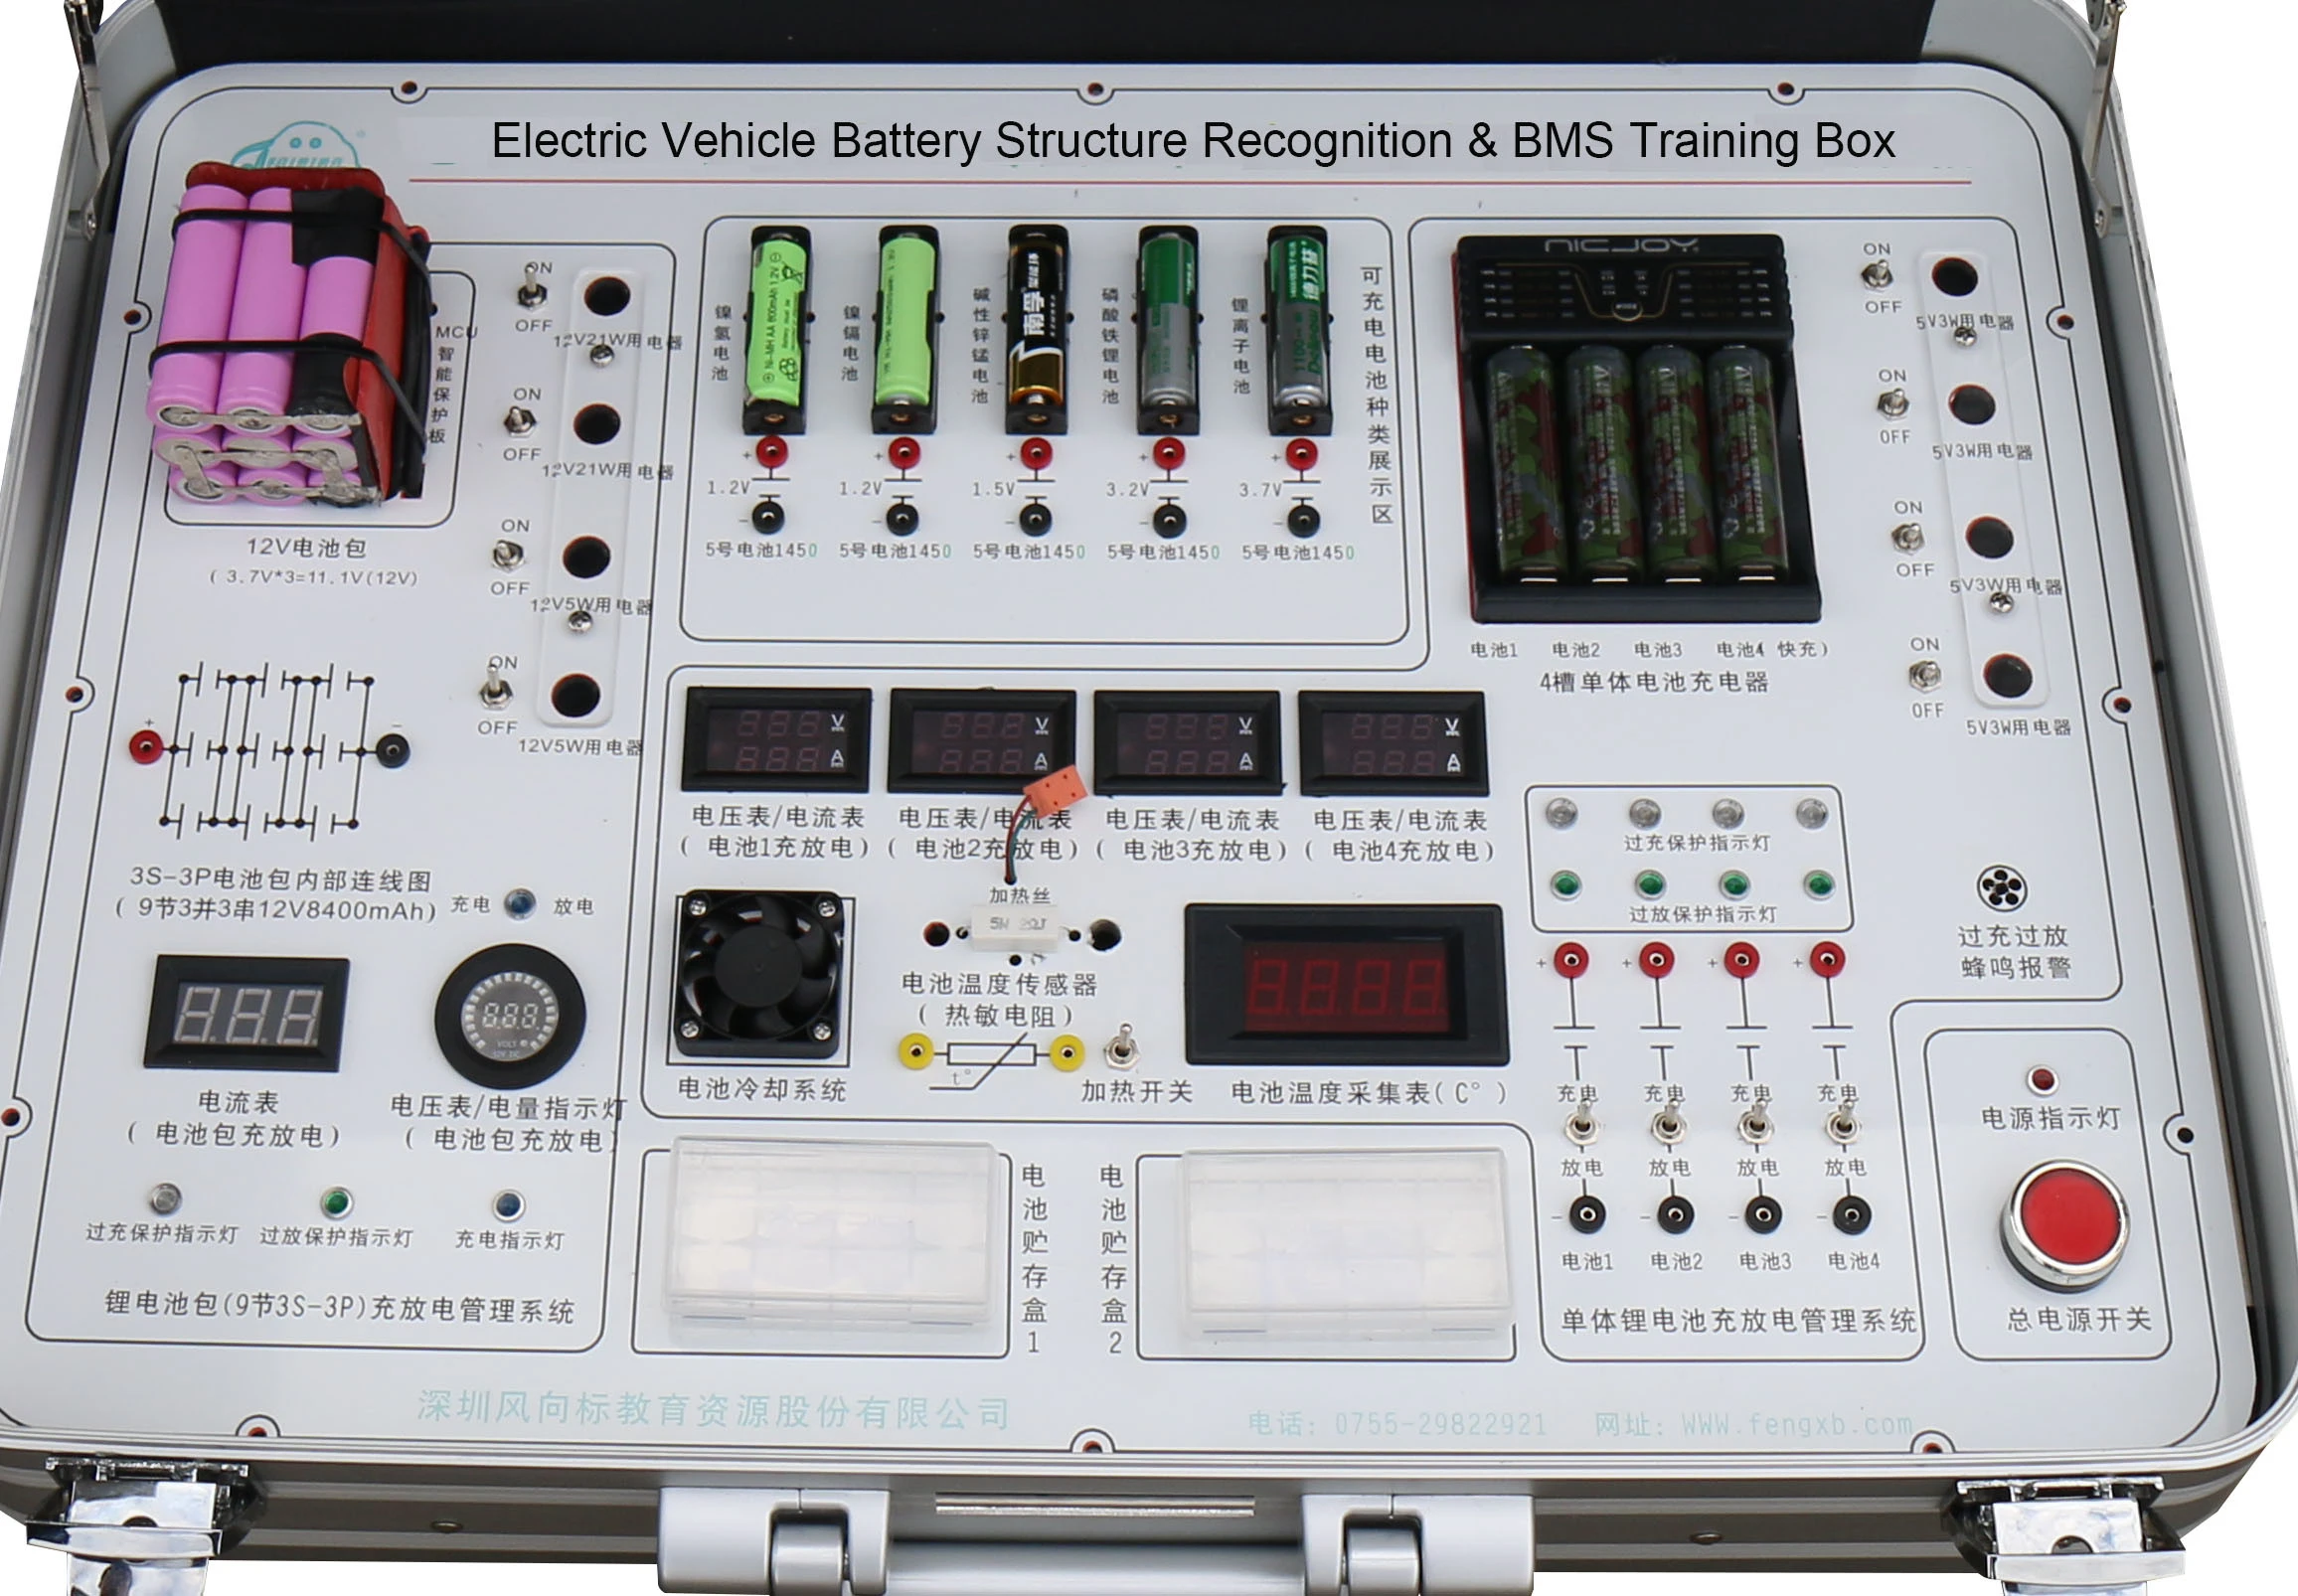 Electric vehicle battery structure recognition and battery management system training box automotive teaching equipment